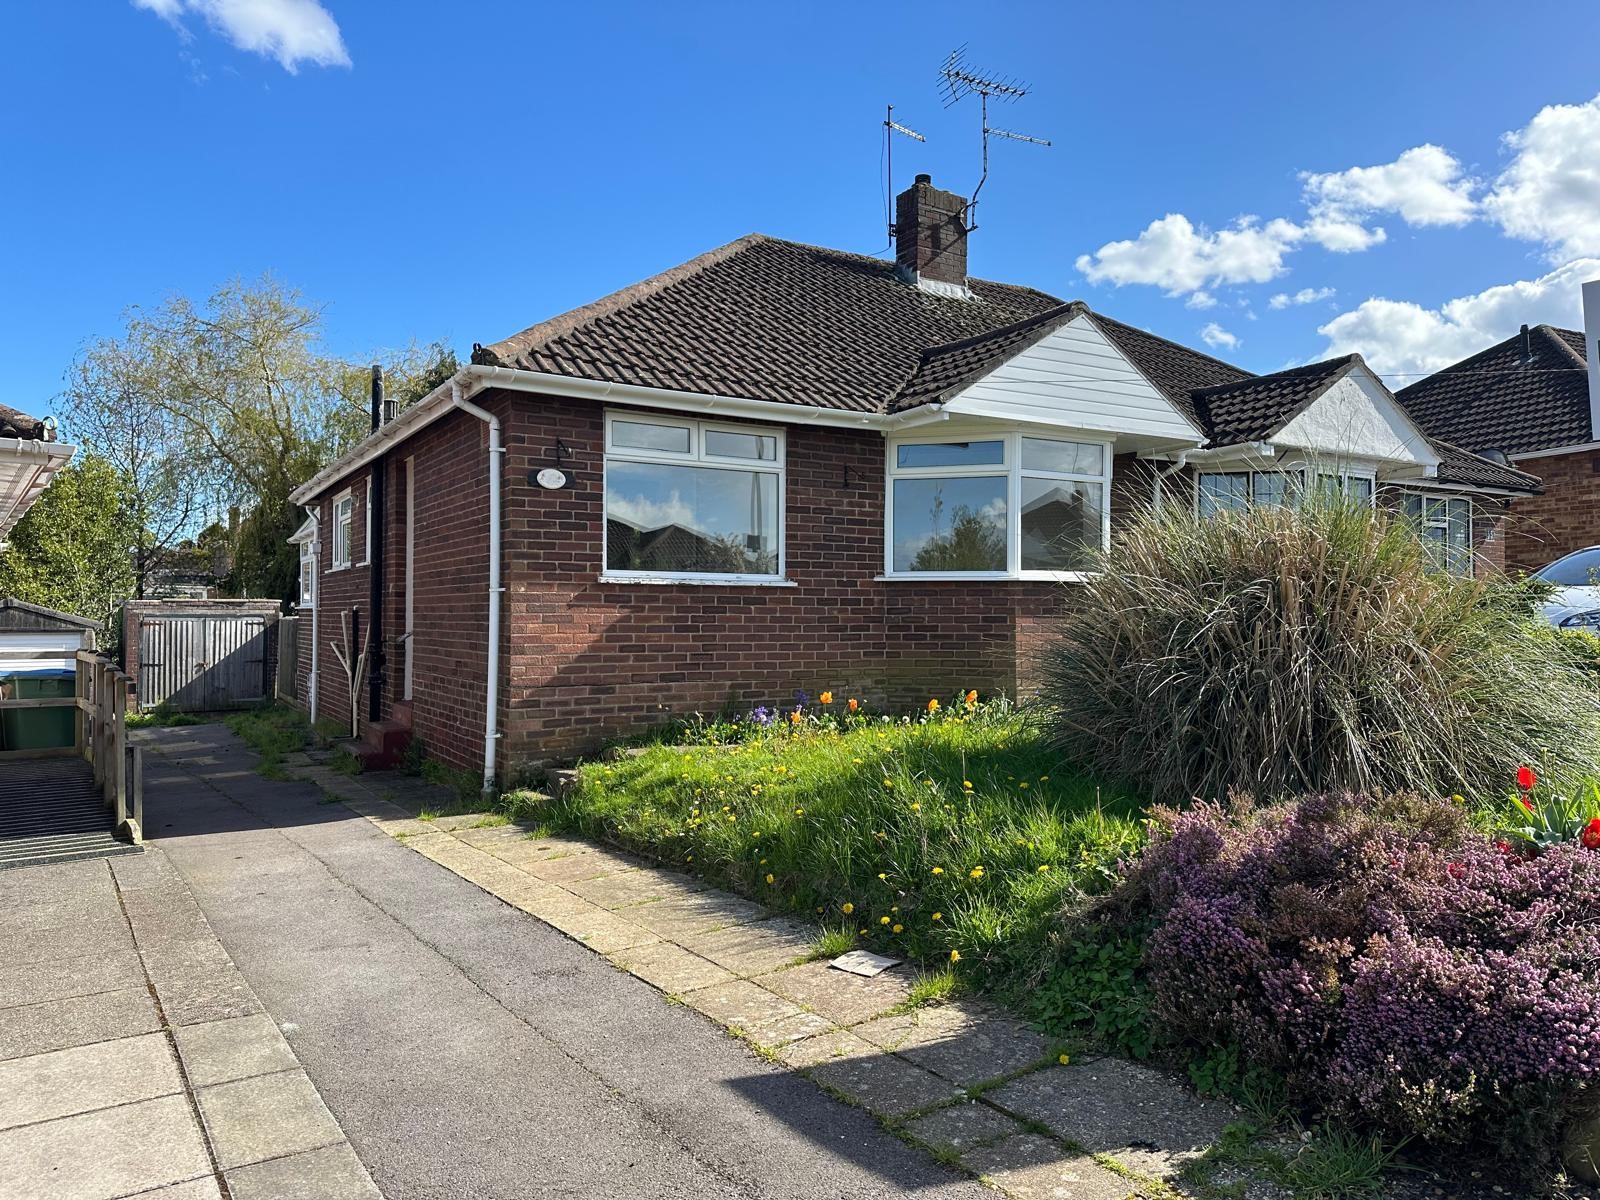 2 bed Bungalow for rent in Fareham. From Pearsons Estate Agents - Fareham